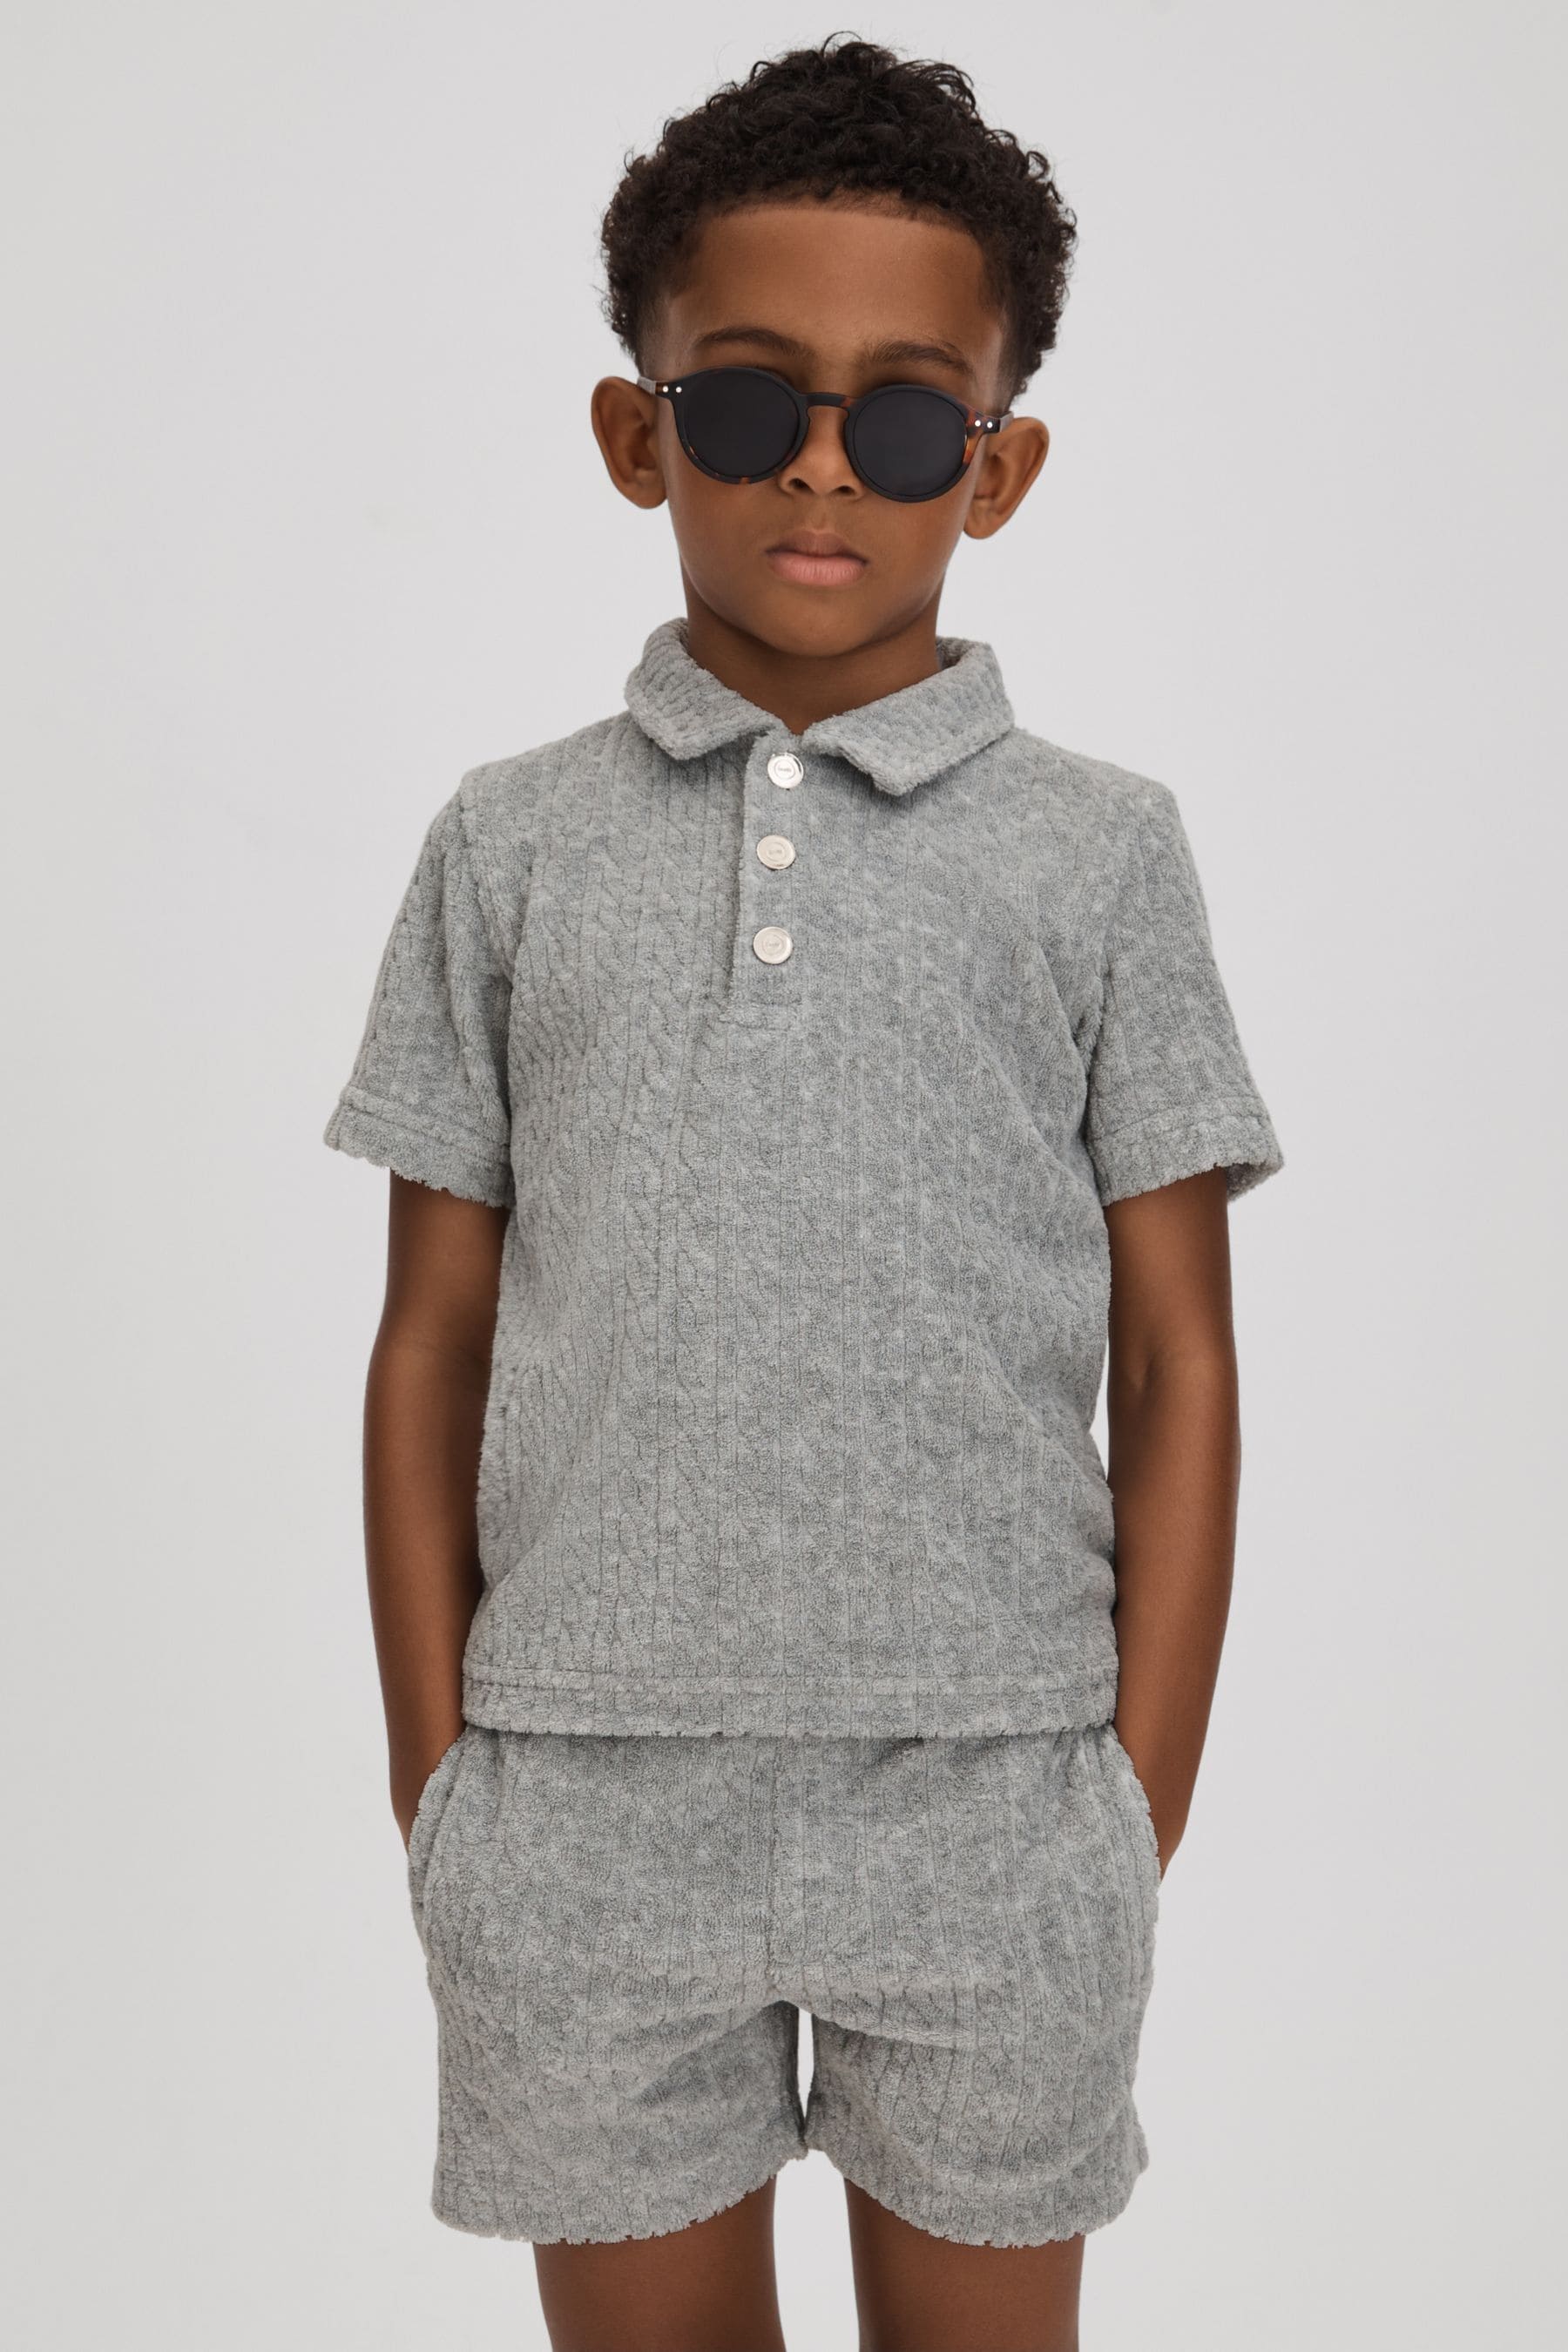 Reiss Iggy - Soft Grey Junior Towelling Polo Shirt, Age 4-5 Years